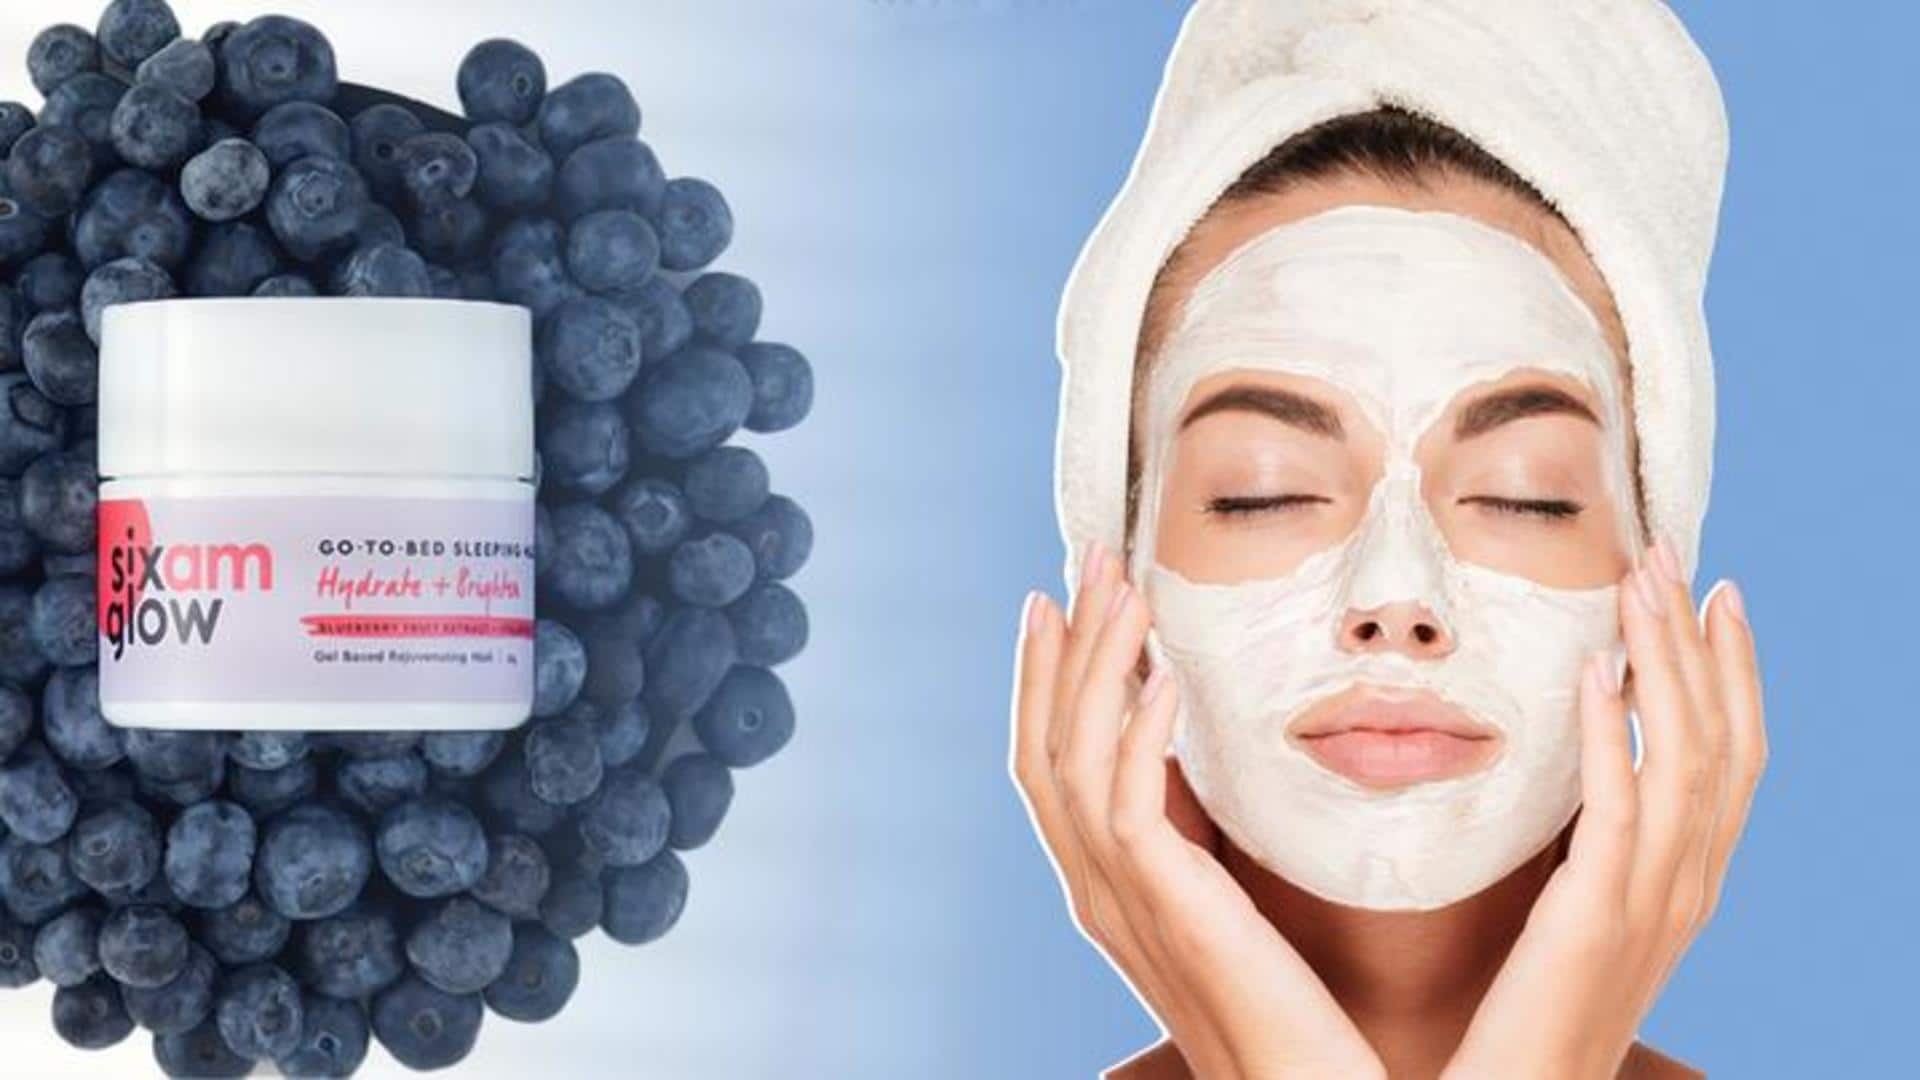 Beauty review: Sixam glow go-to-bed sleeping mask